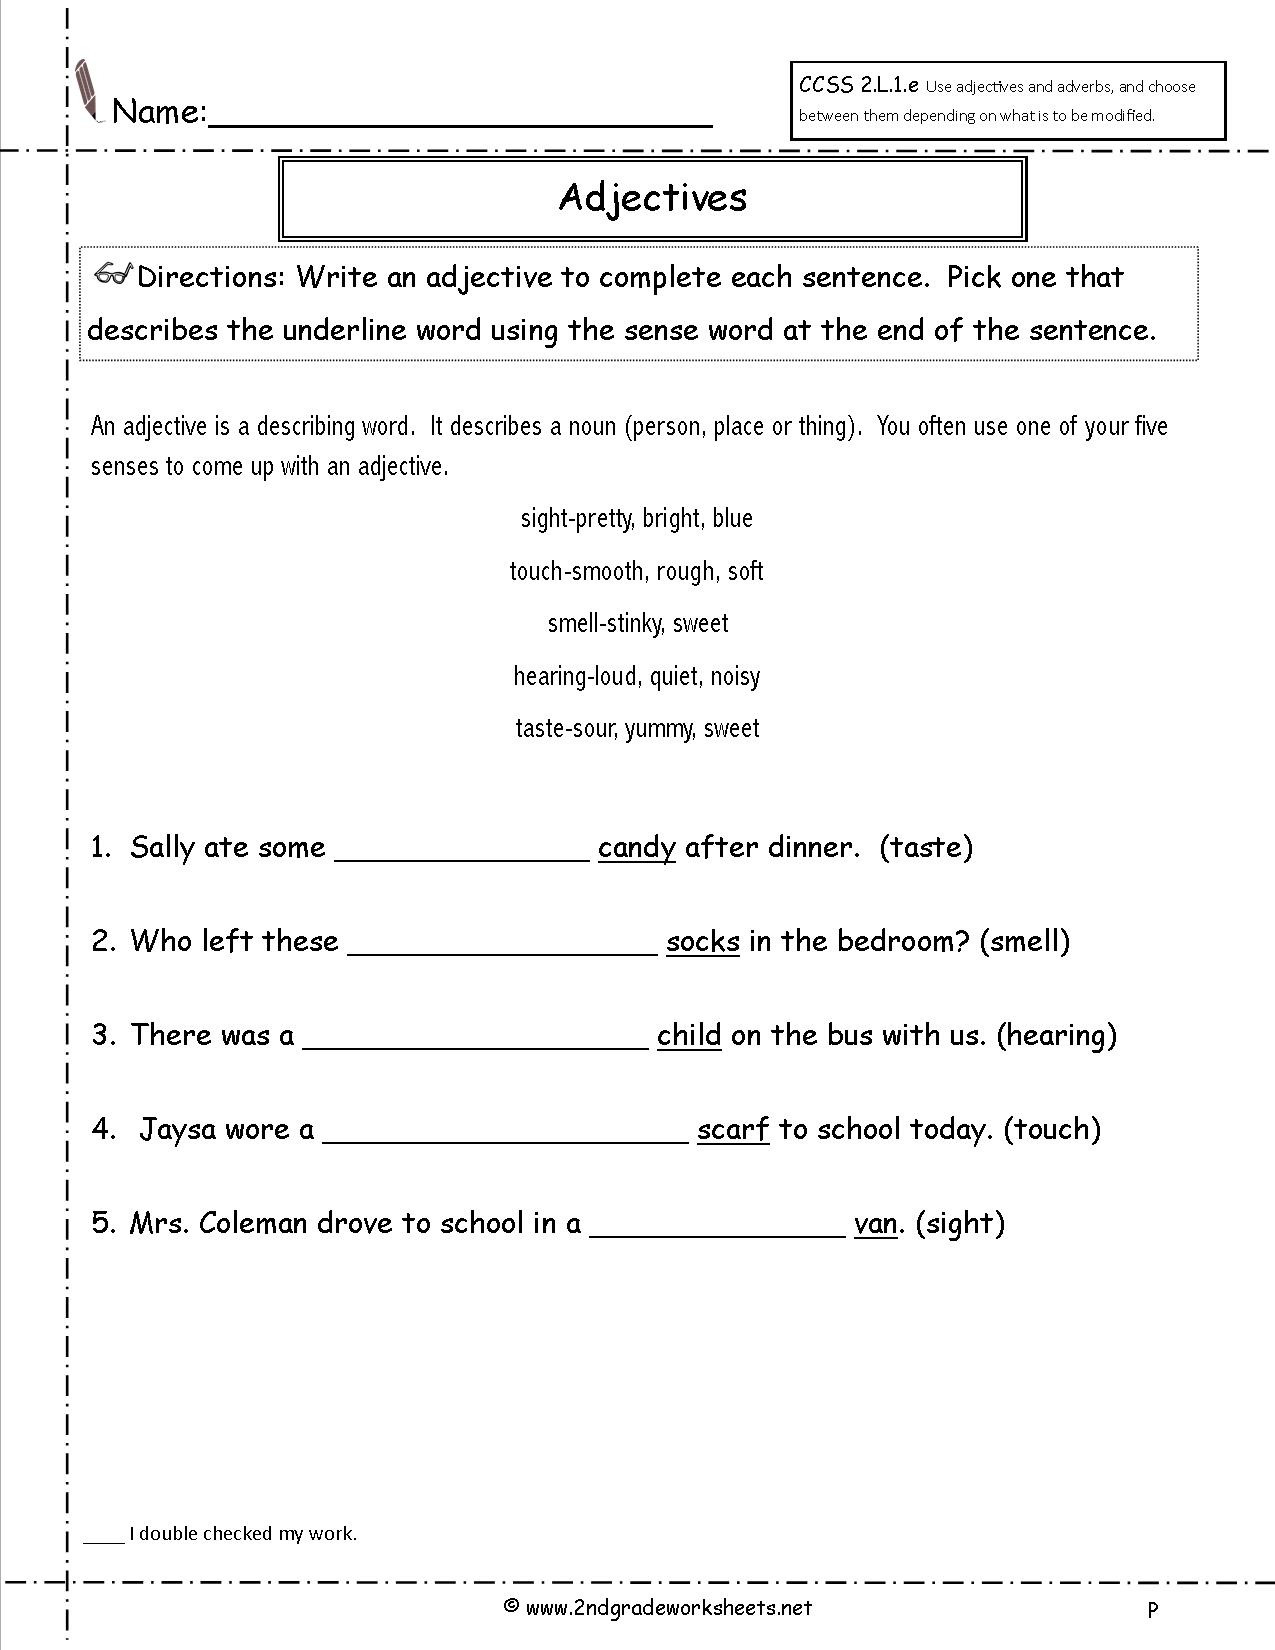 free-using-adjectives-and-adverbs-worksheets-db-excel